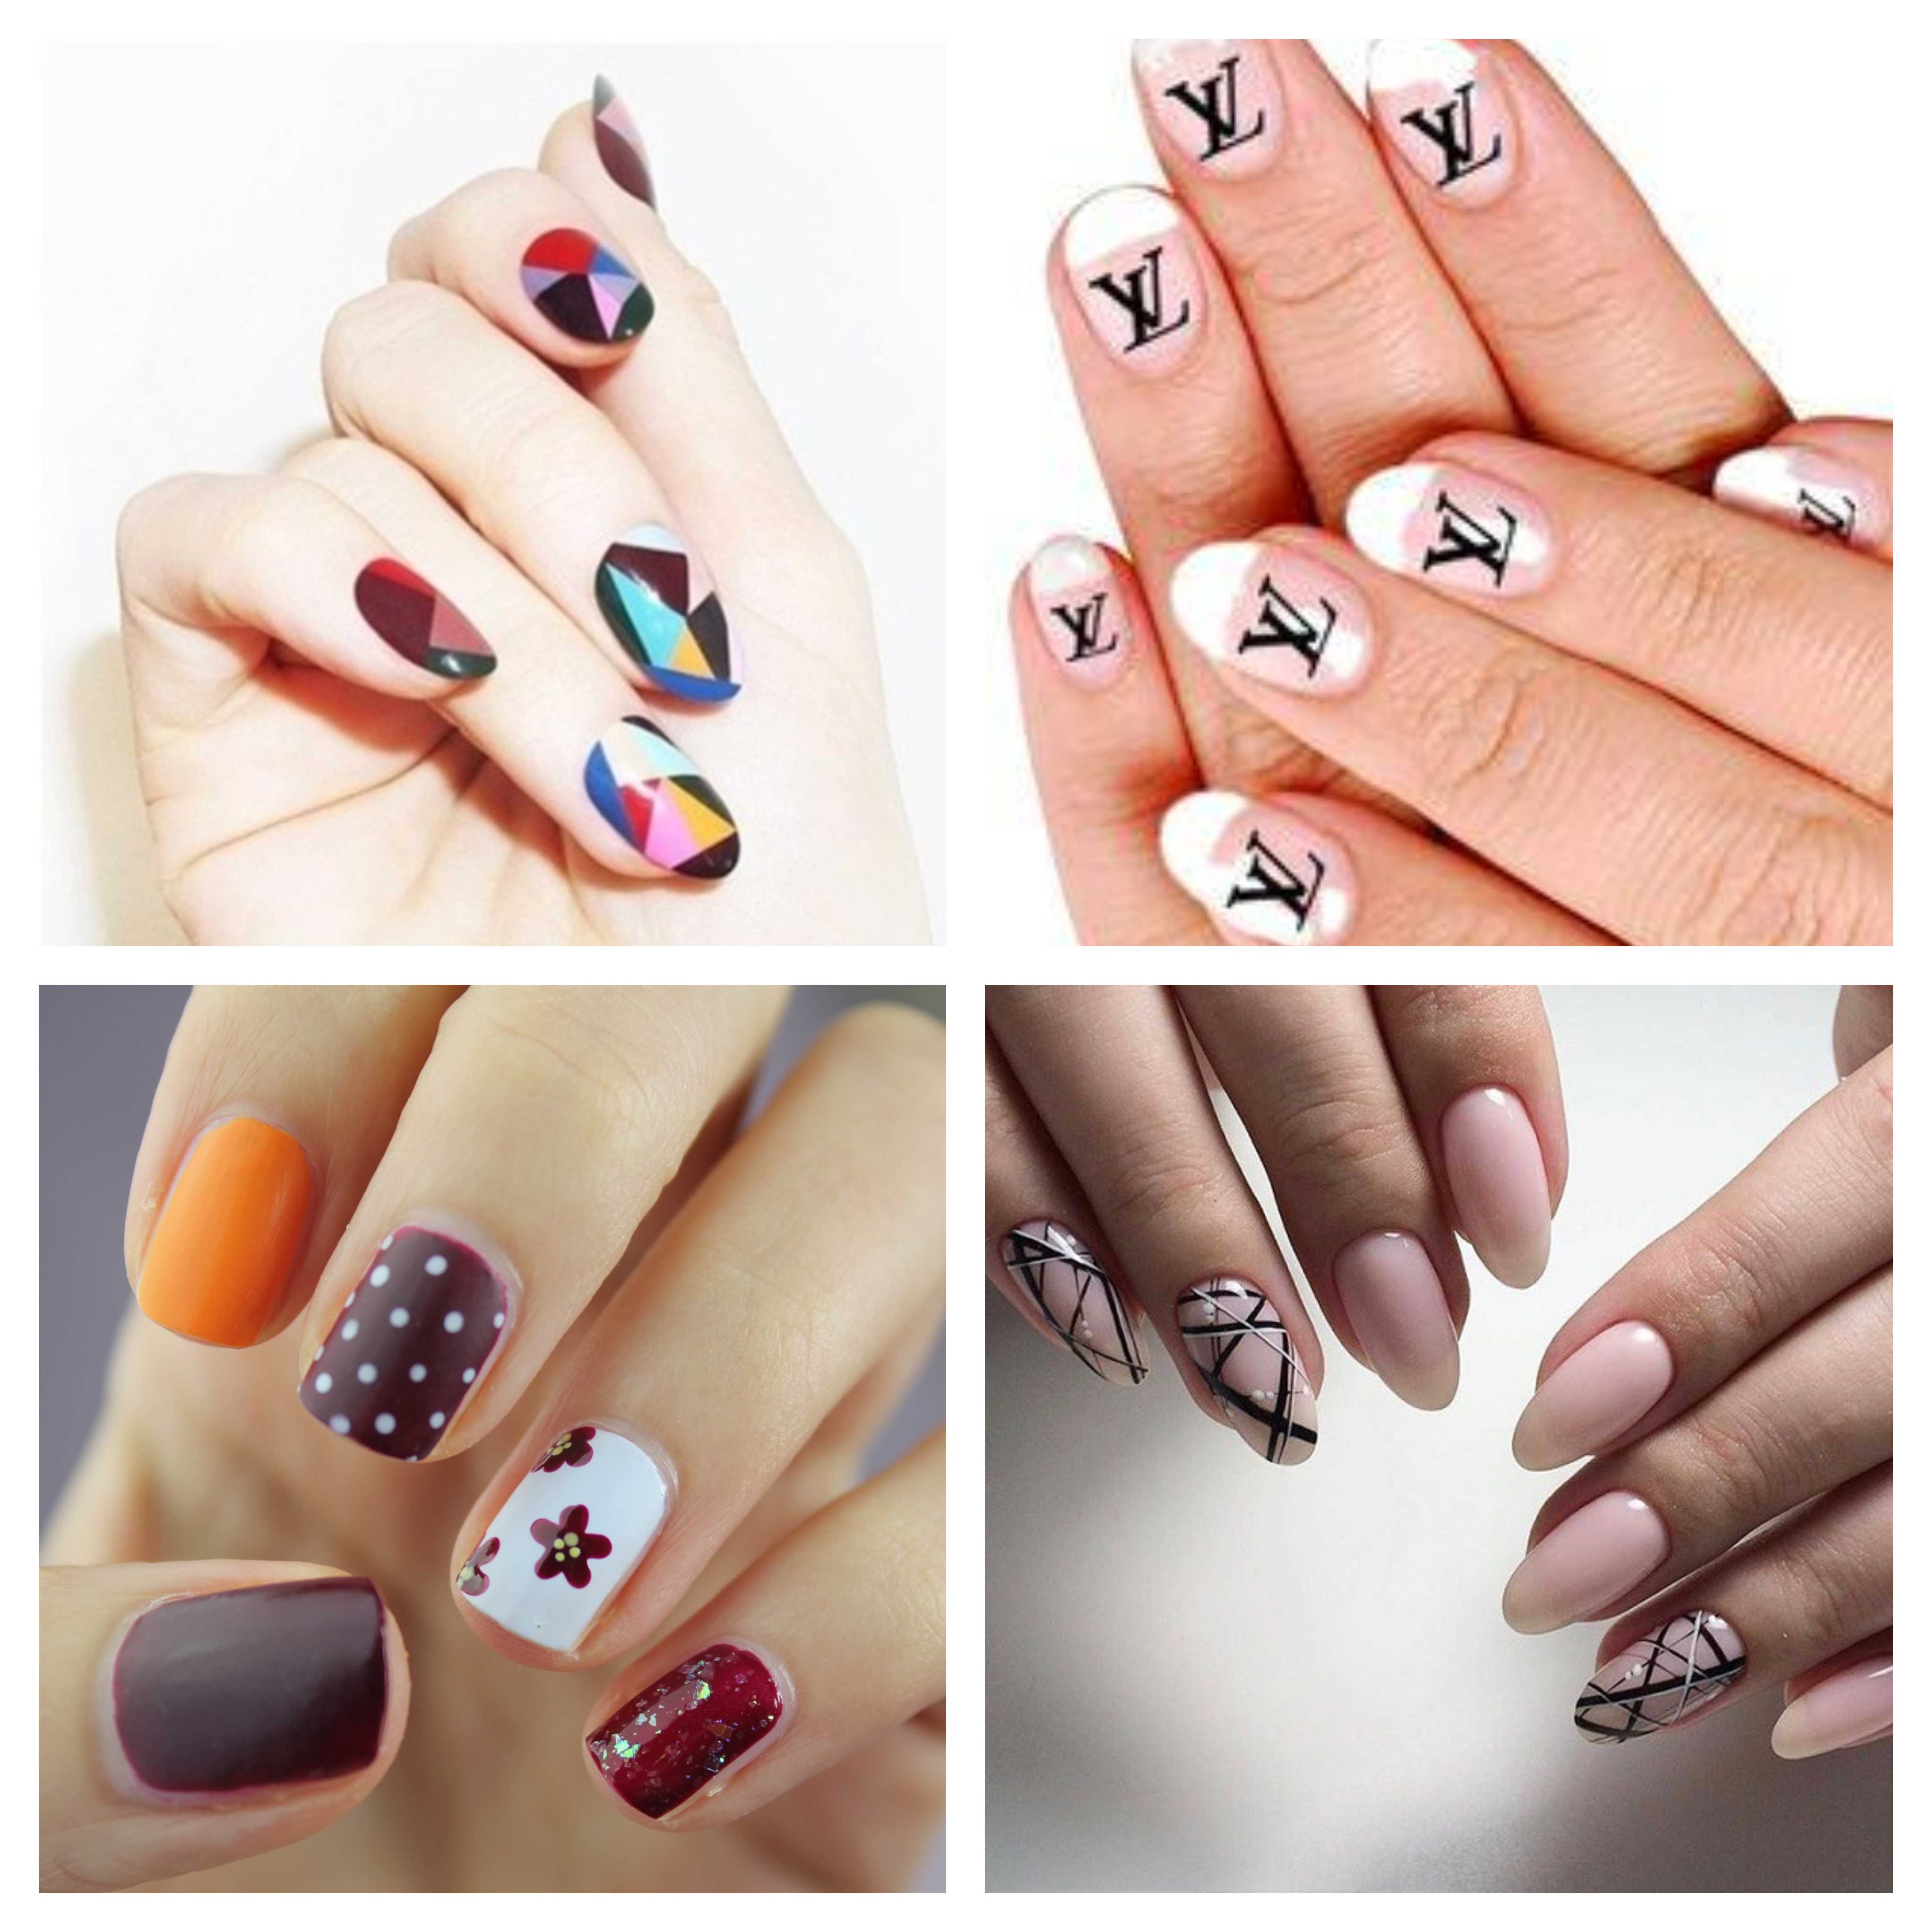 Do Not Miss These Nail Art Trends Of 2018!